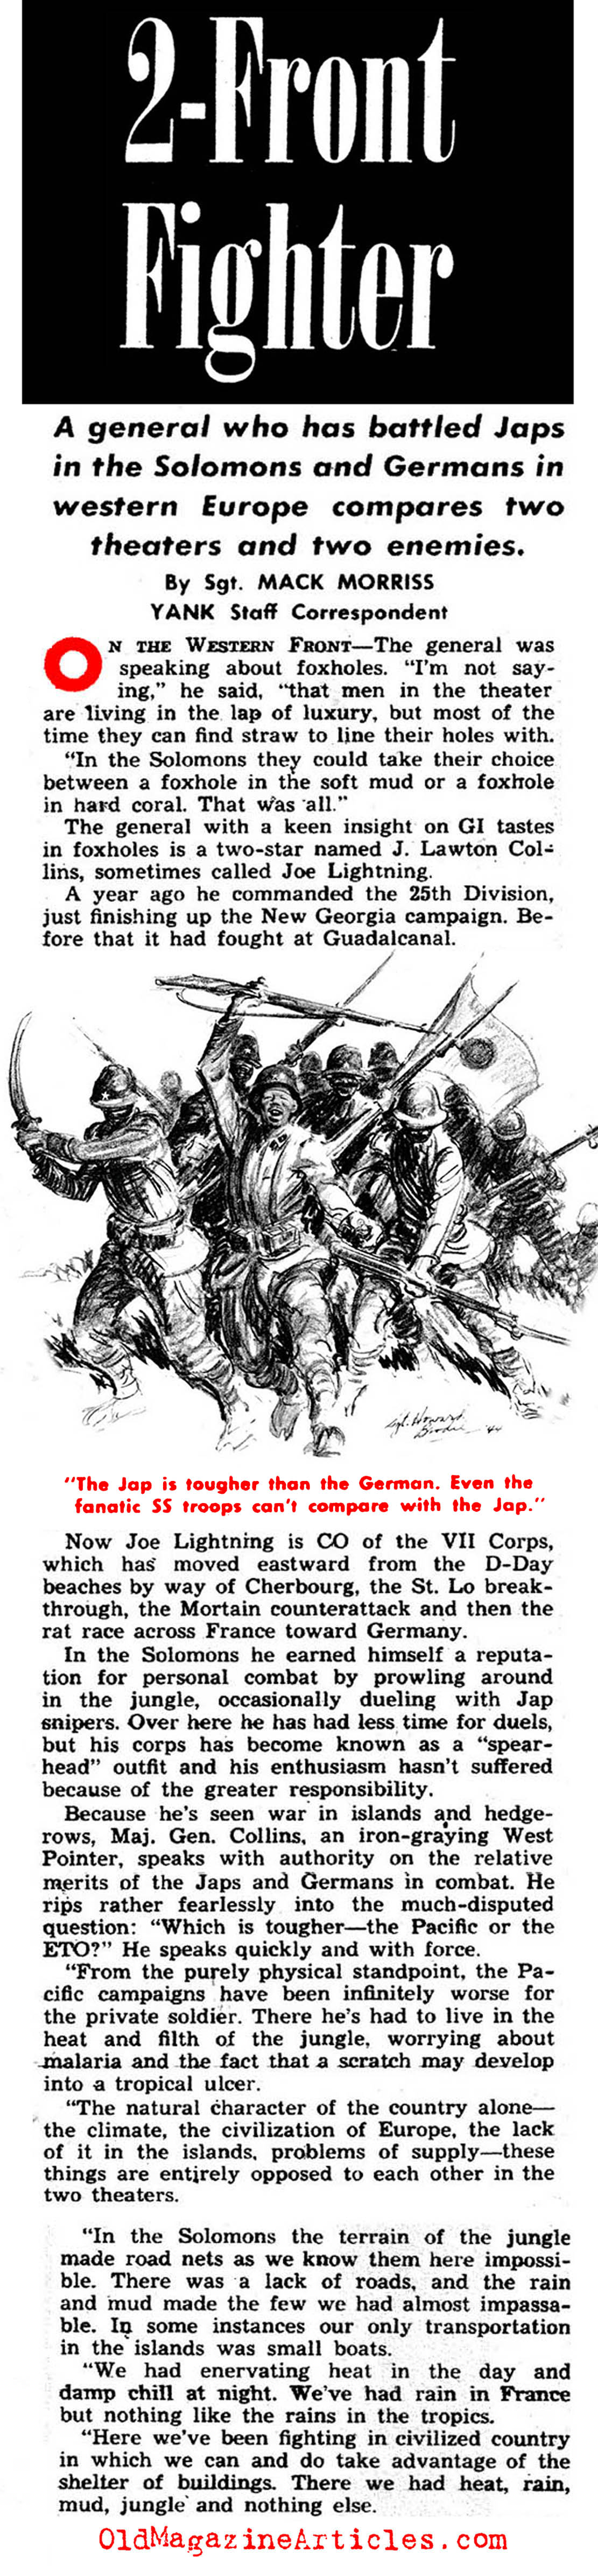 Who Was Tougher: The Japanese or The Germans?  (Yank Magazine, 1944)